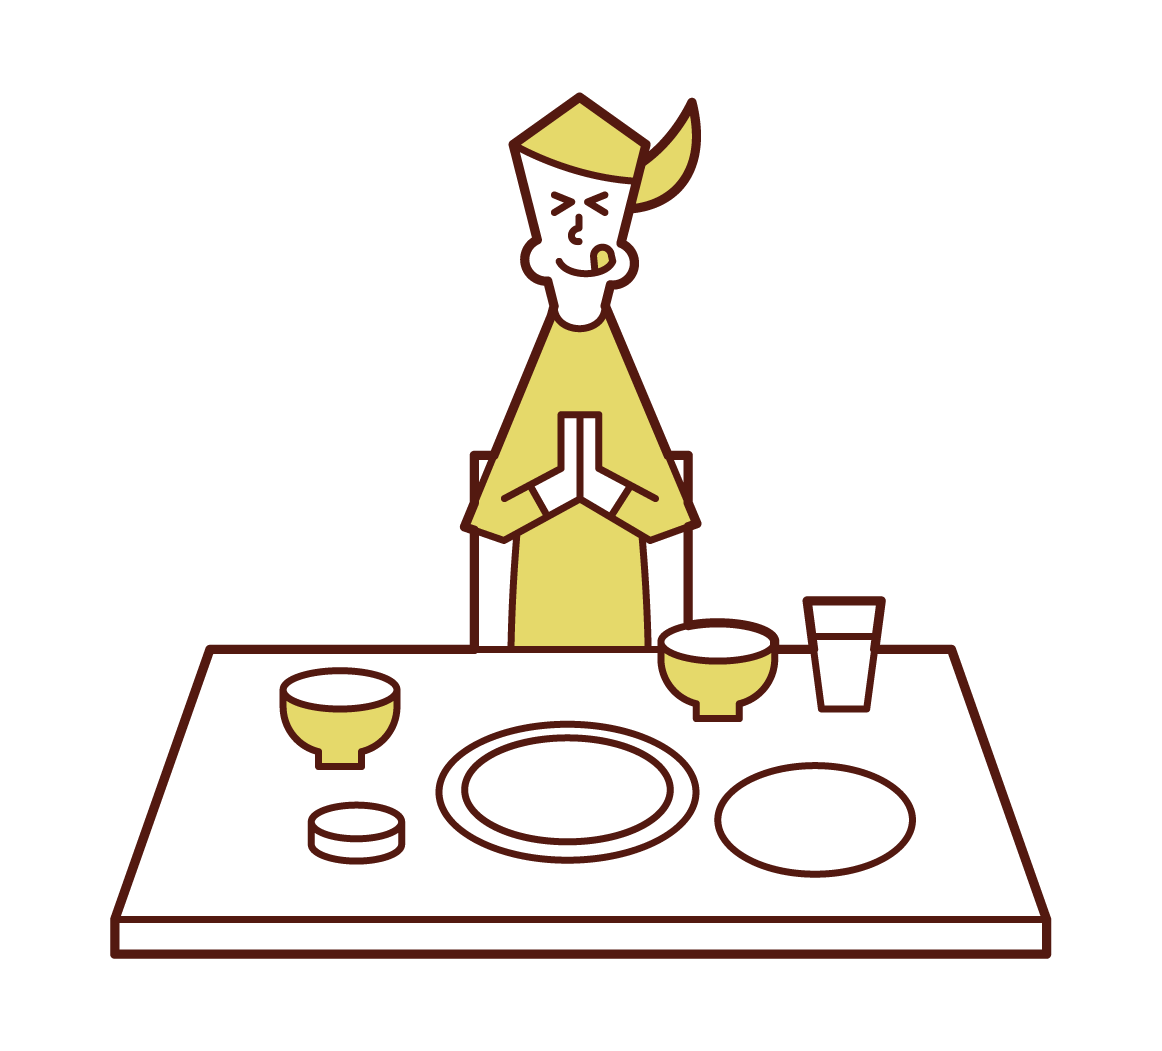 Illustration of a feasting person (woman)